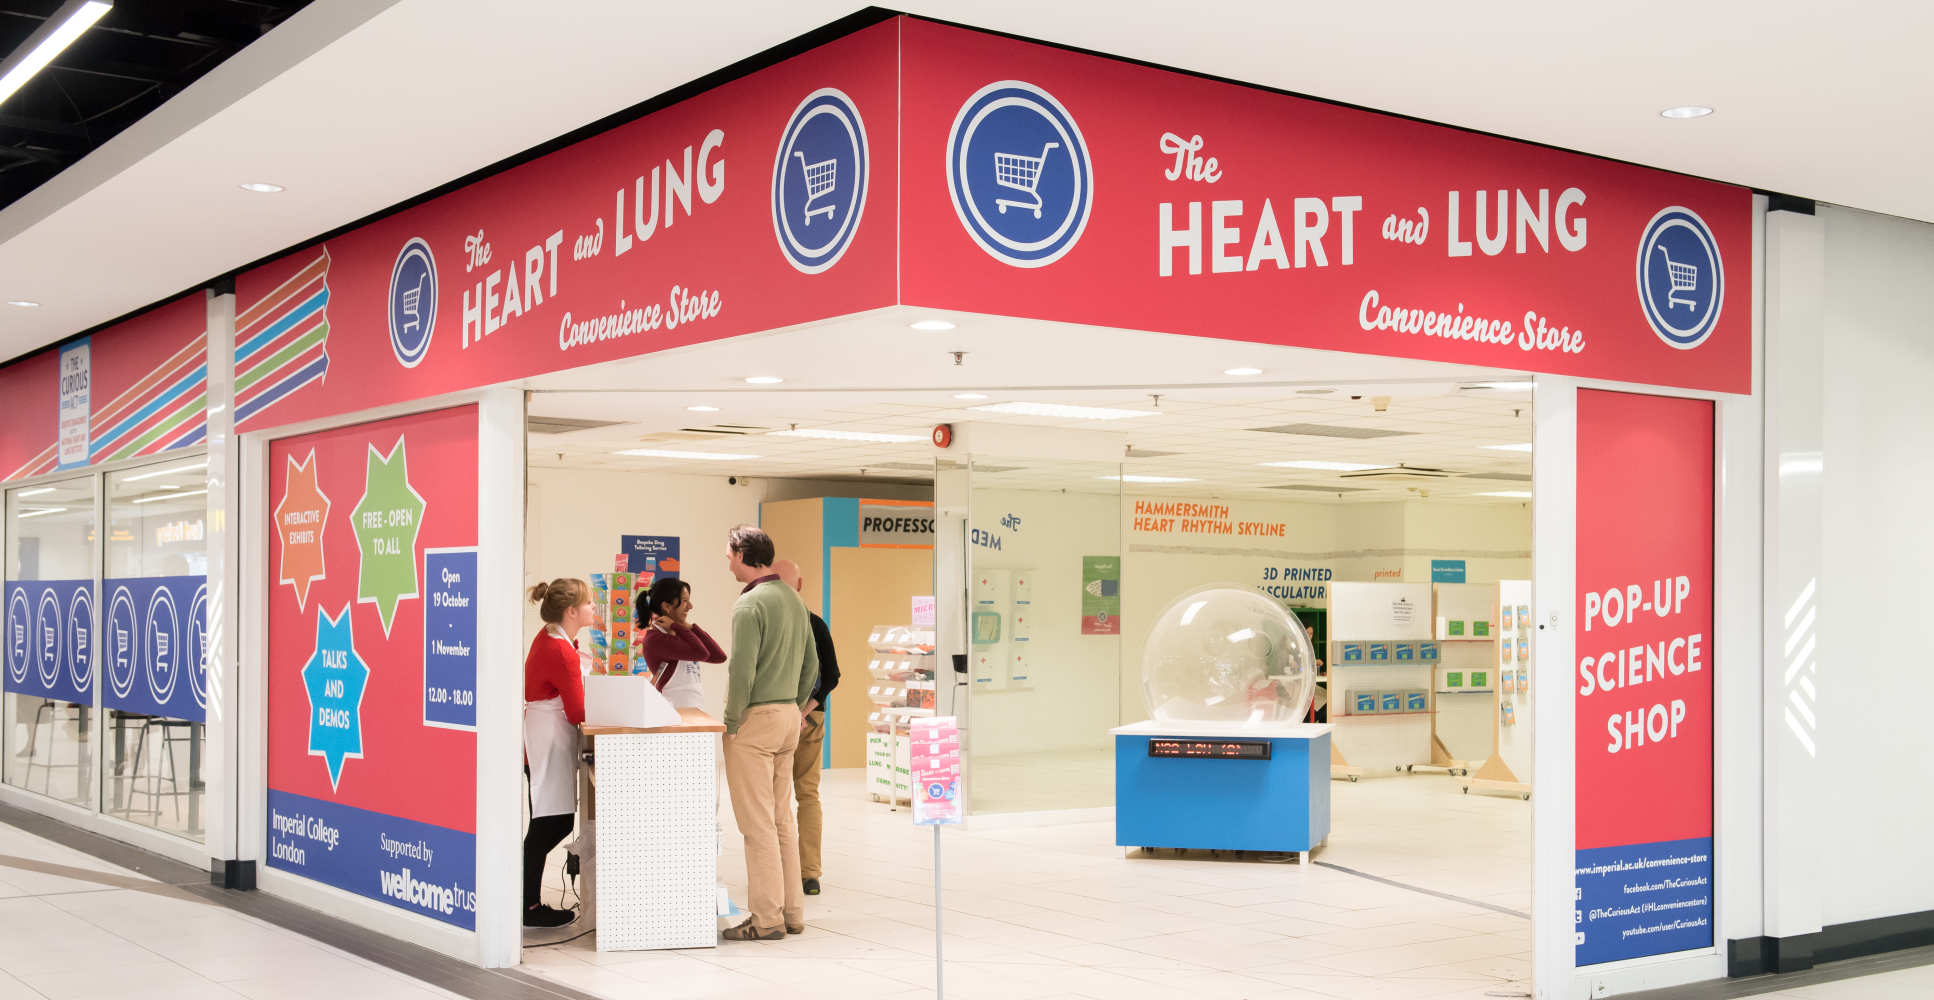 Exterior heart and lung convenience store